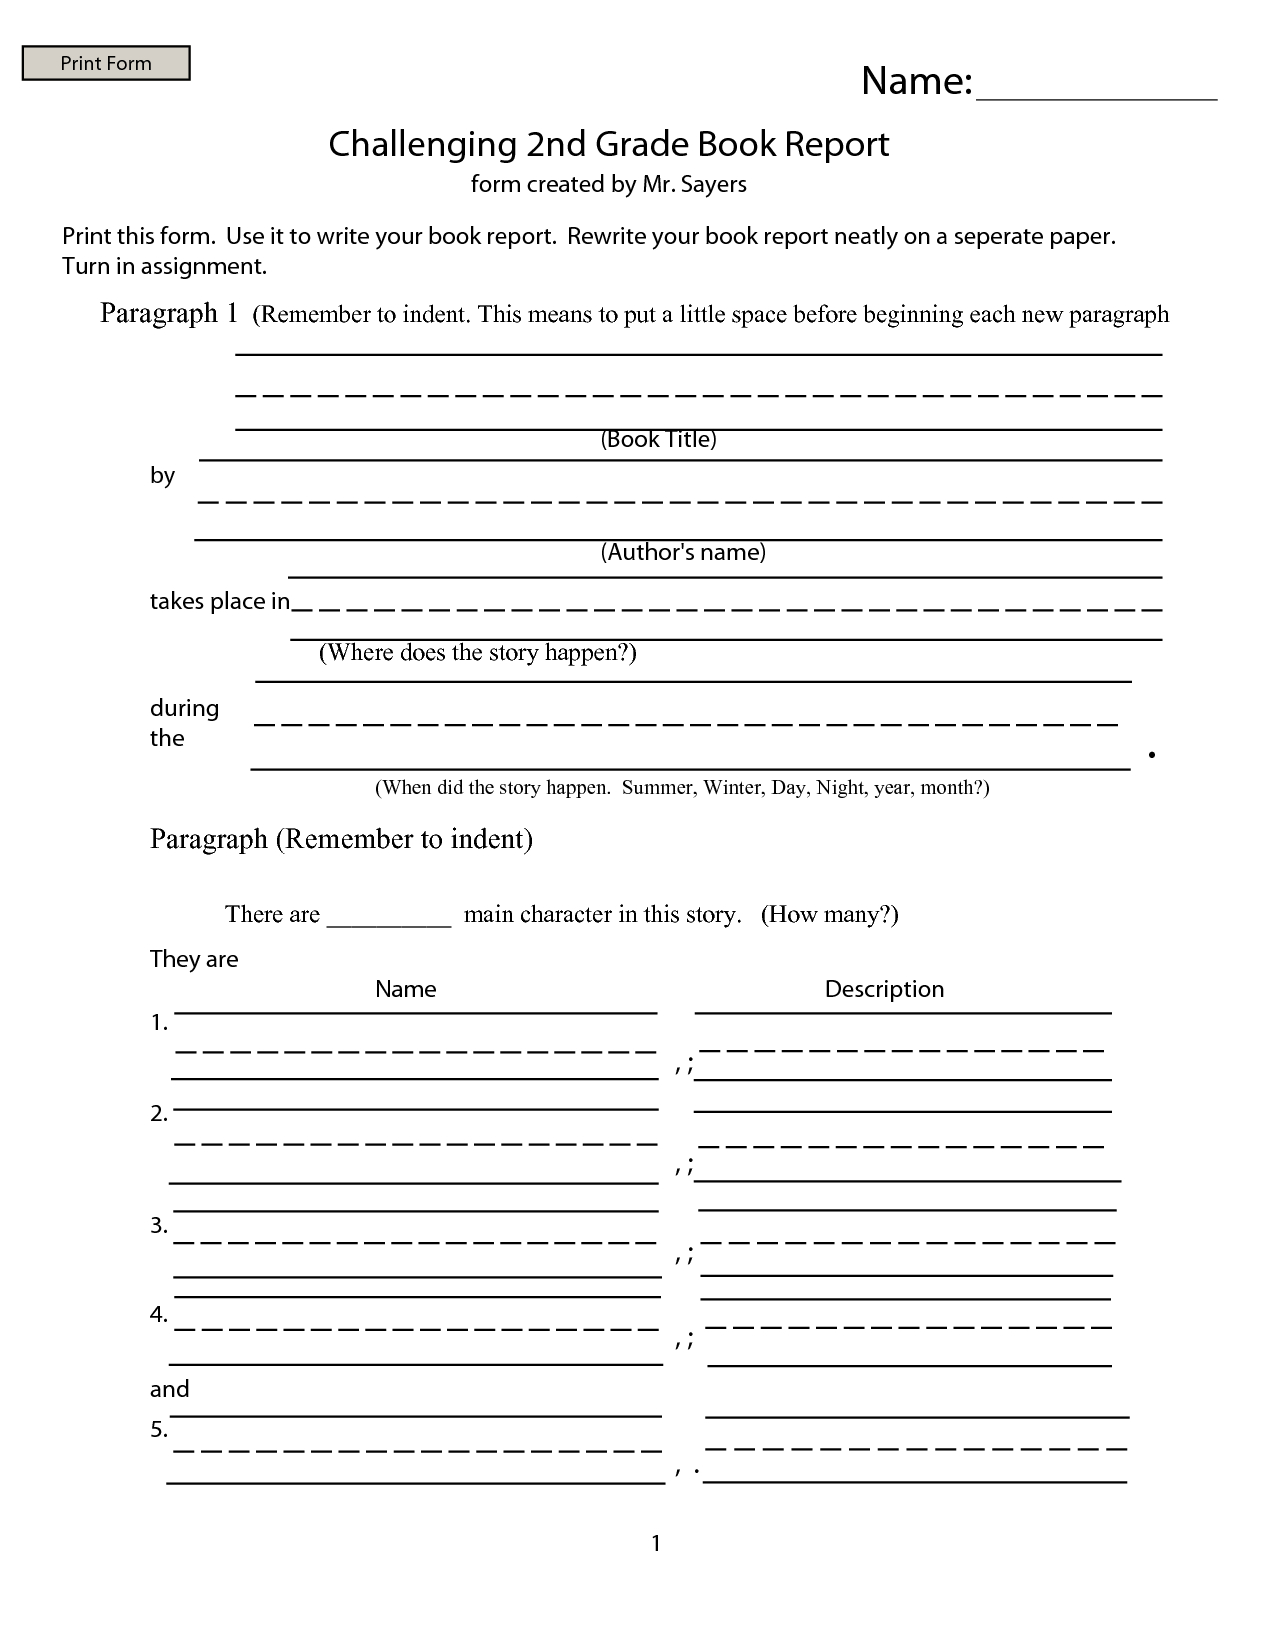 Worksheet Book Report | Printable Worksheets And Activities Throughout 4Th Grade Book Report Template